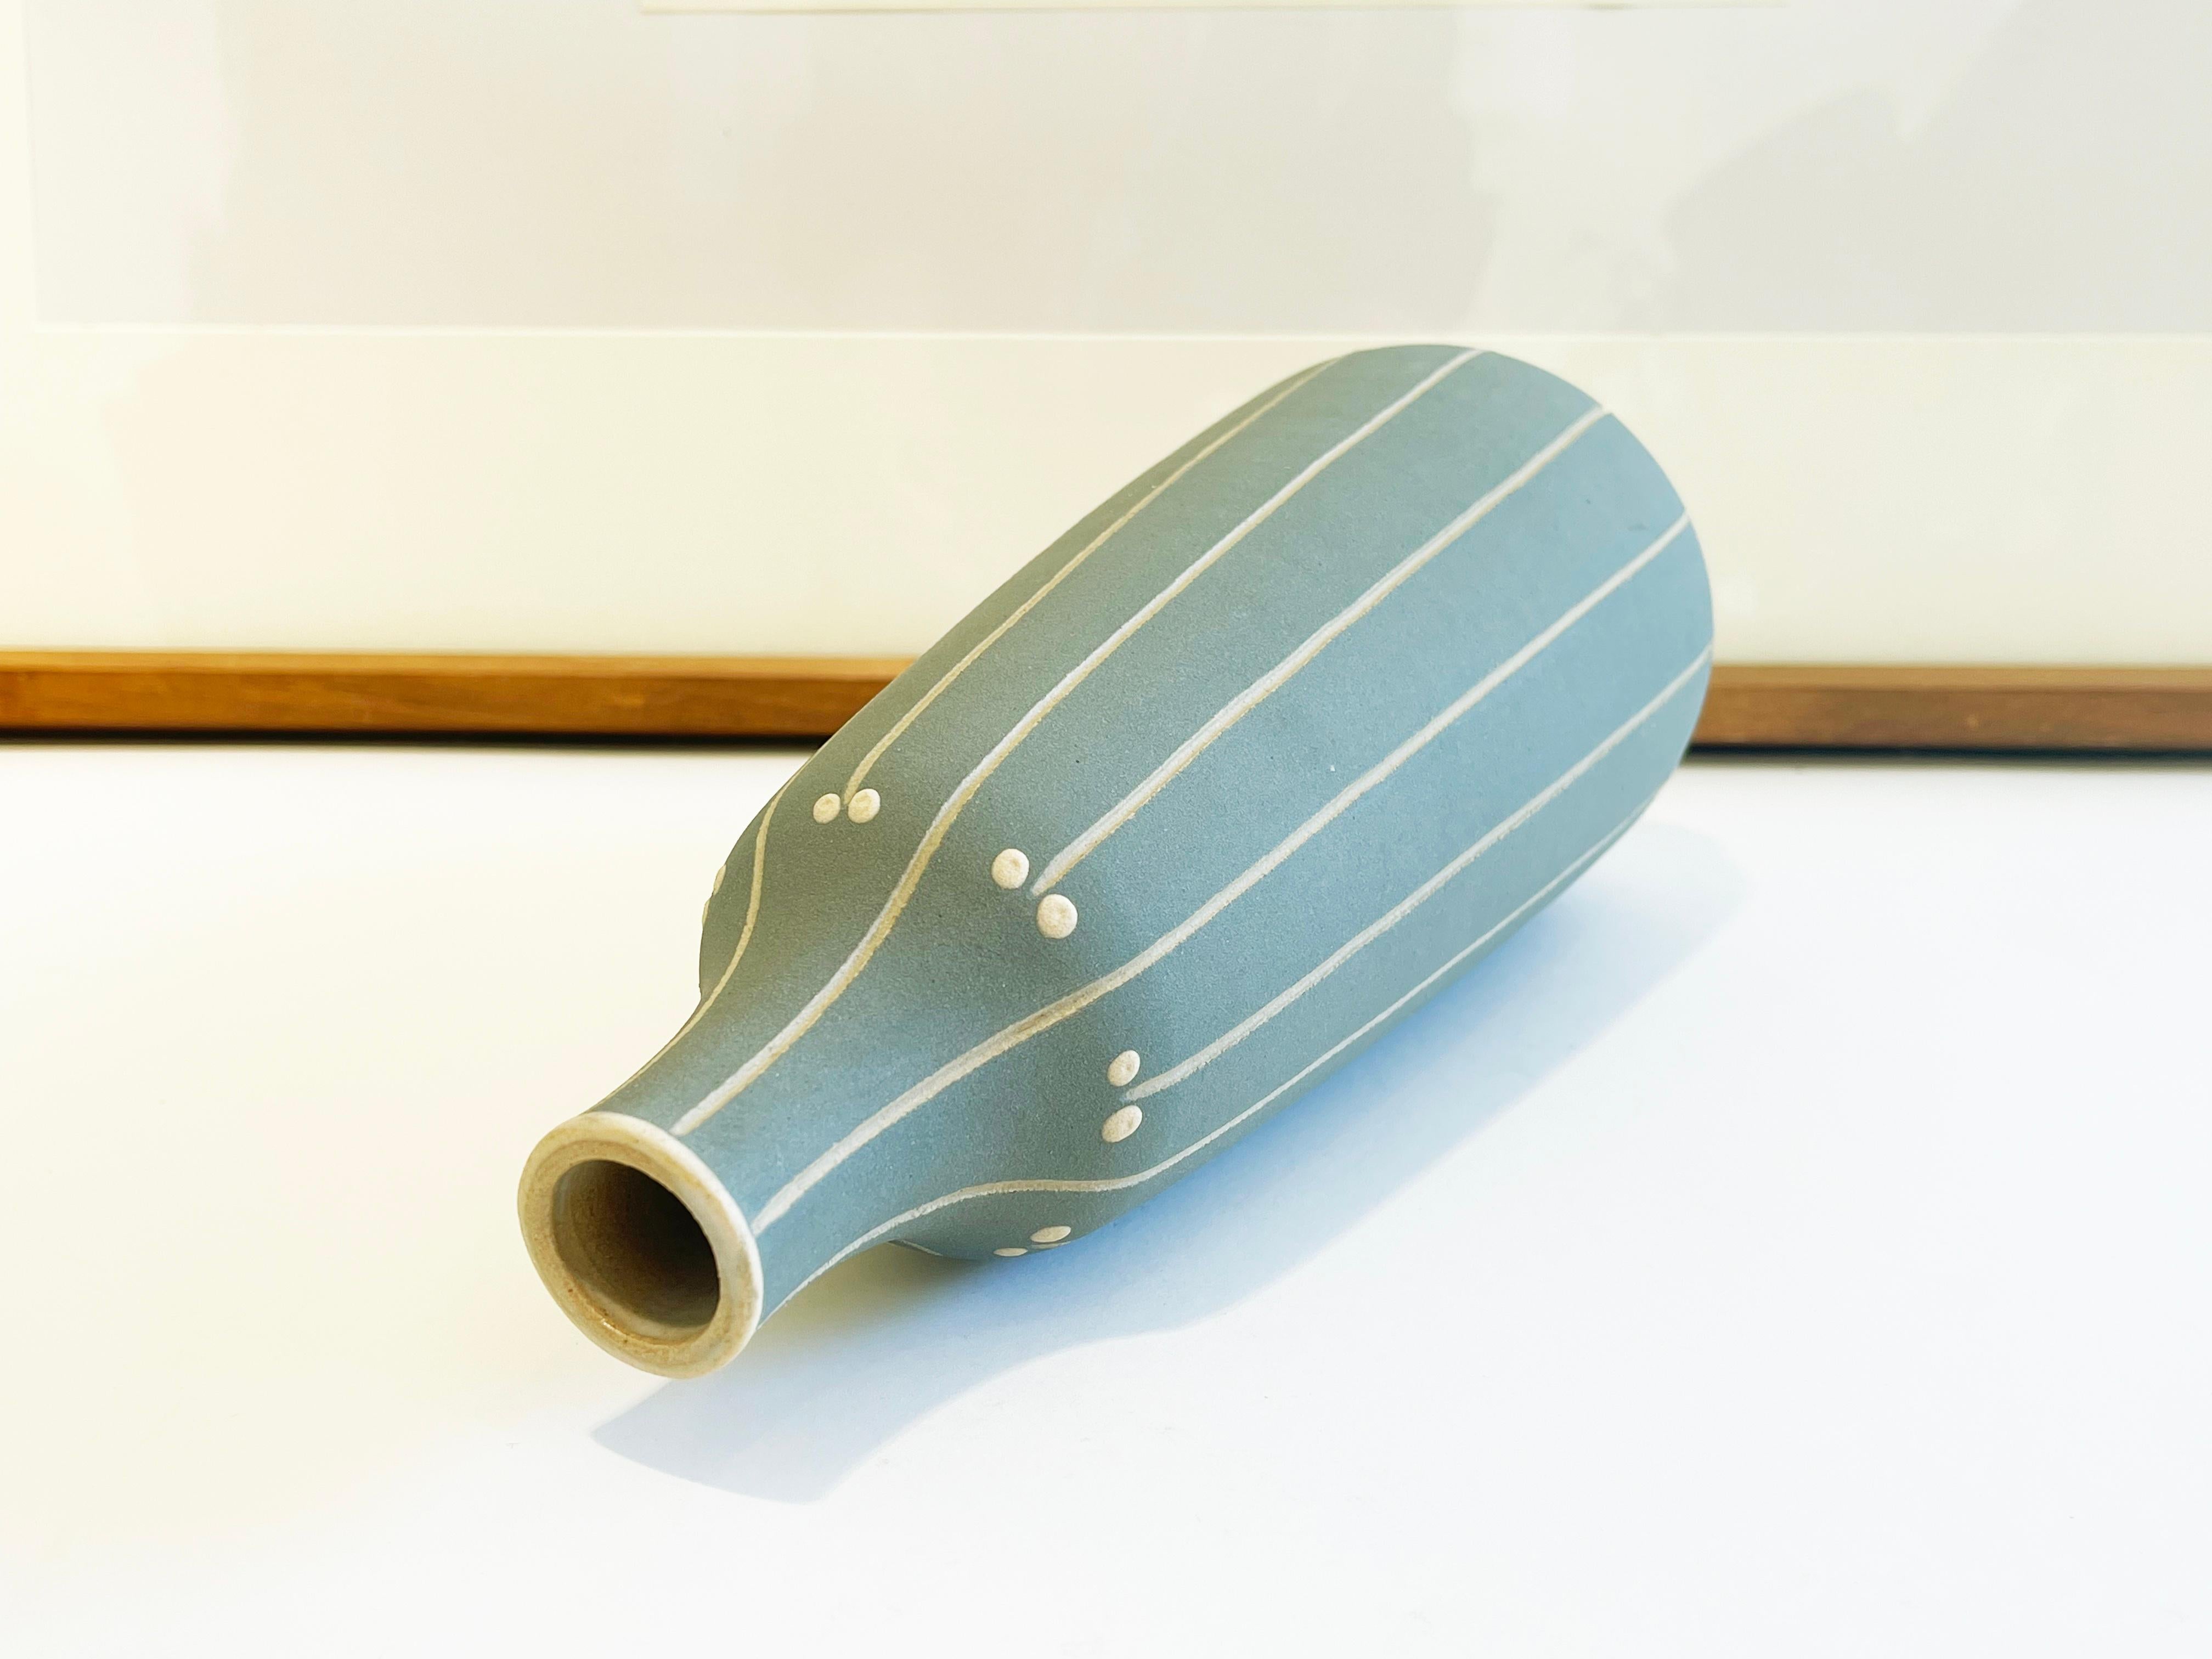 Hand-Crafted Art Deco Vase by Carl Fischer Incised Decor, Pastel Turquoise, 1920's, Germany For Sale